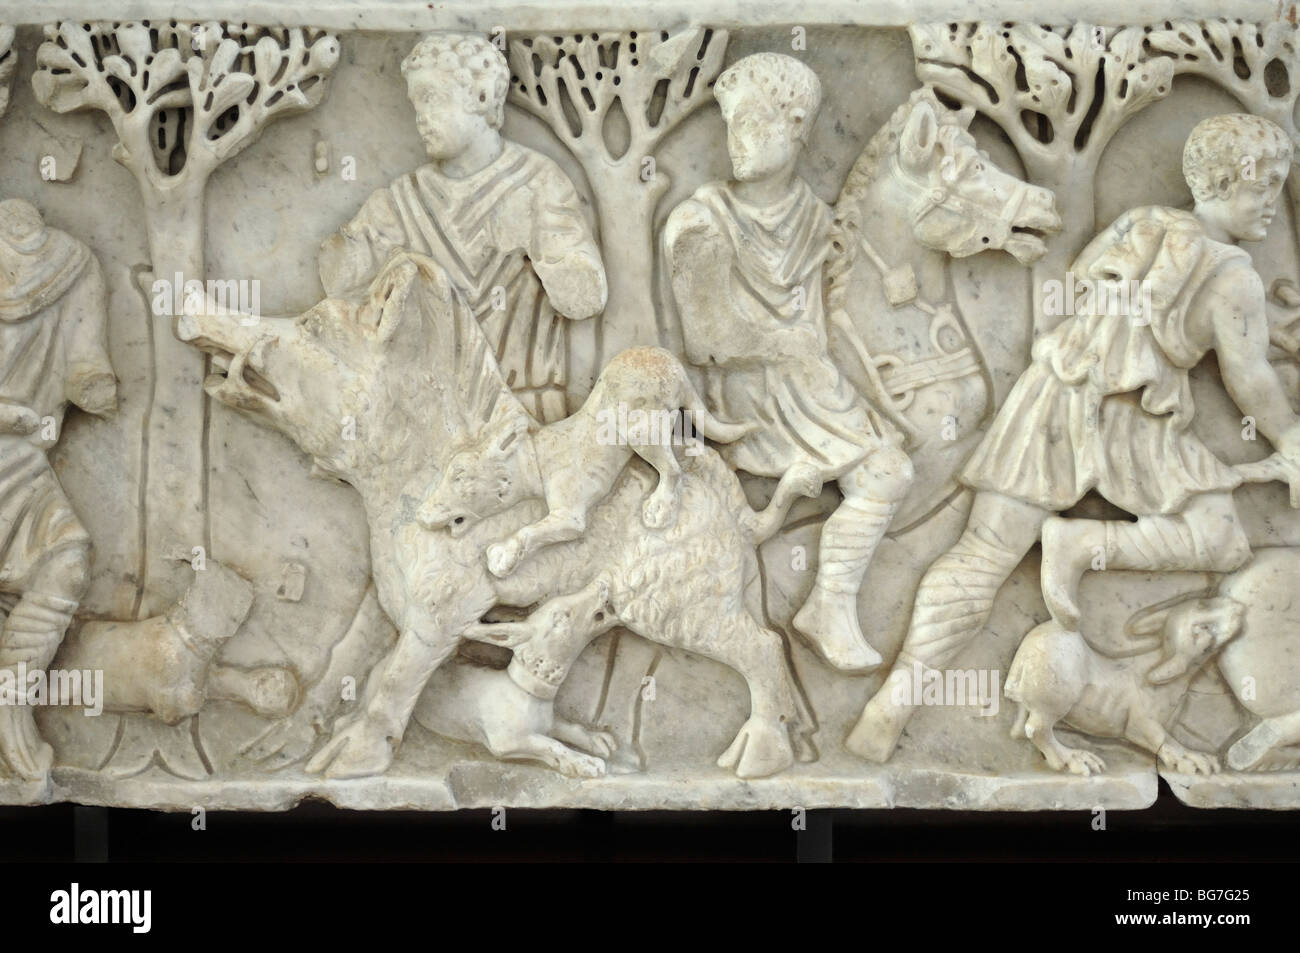 Roman Sacrophagus or Tombs Showing Boar Hunters Hunting (c3rd AD),from Alyscamps Cemetery, Arles Antique Museum, Provence,France Stock Photo